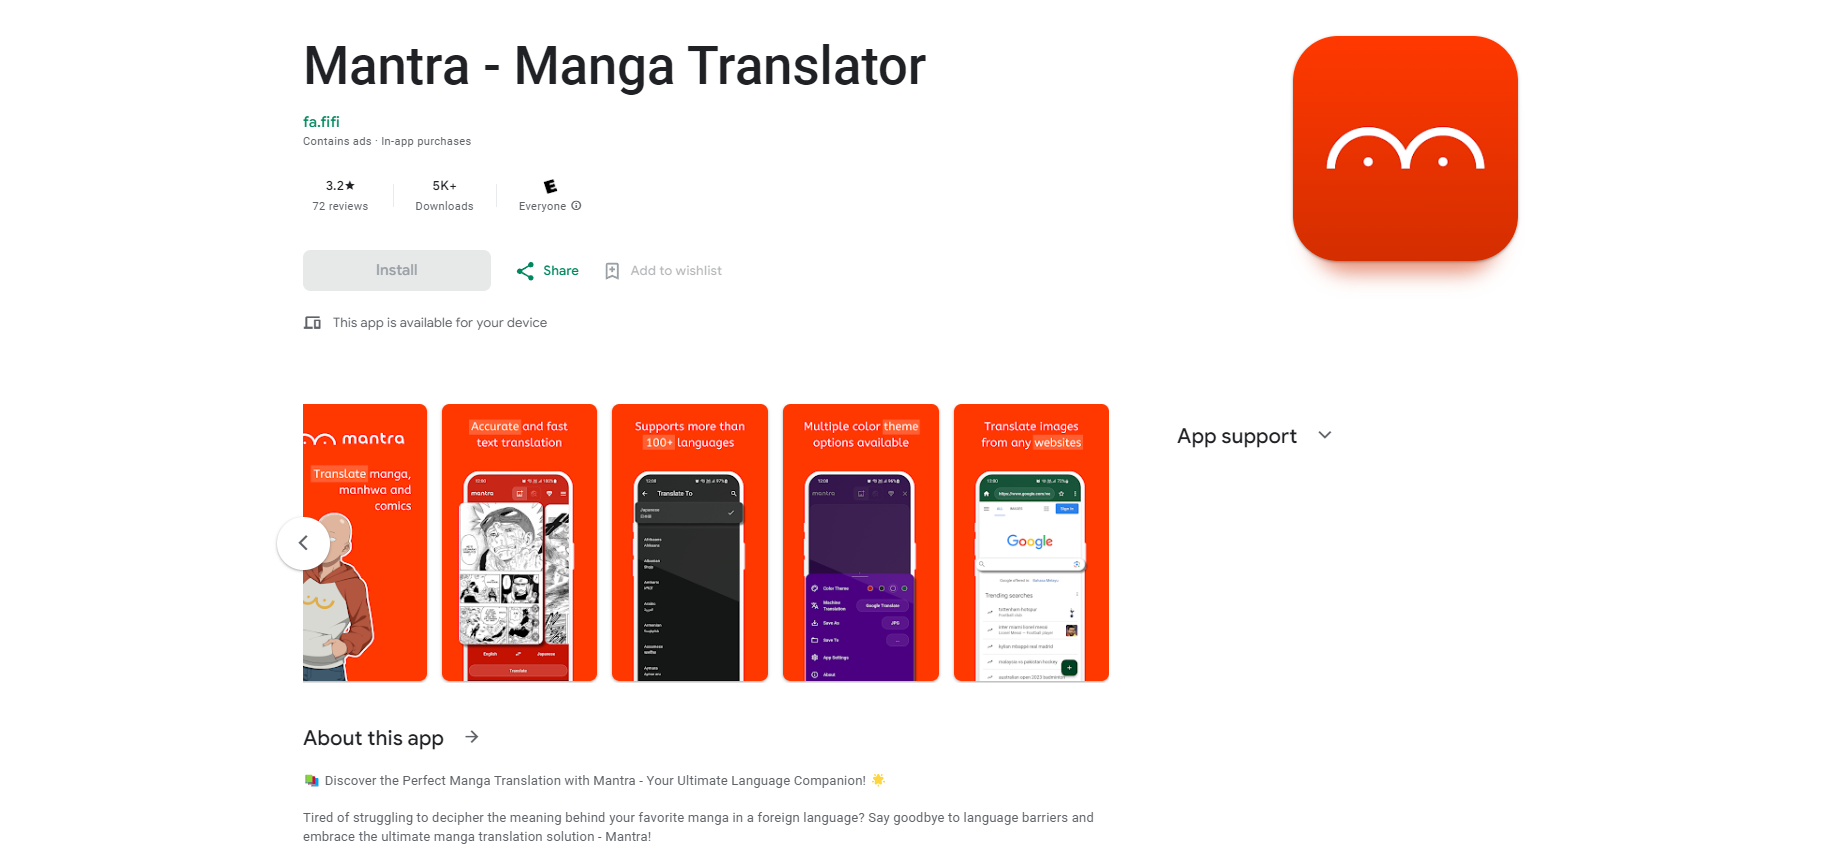 Mantra - Manga Translator: Your go-to app for translating manga! Download now on the Play Store!